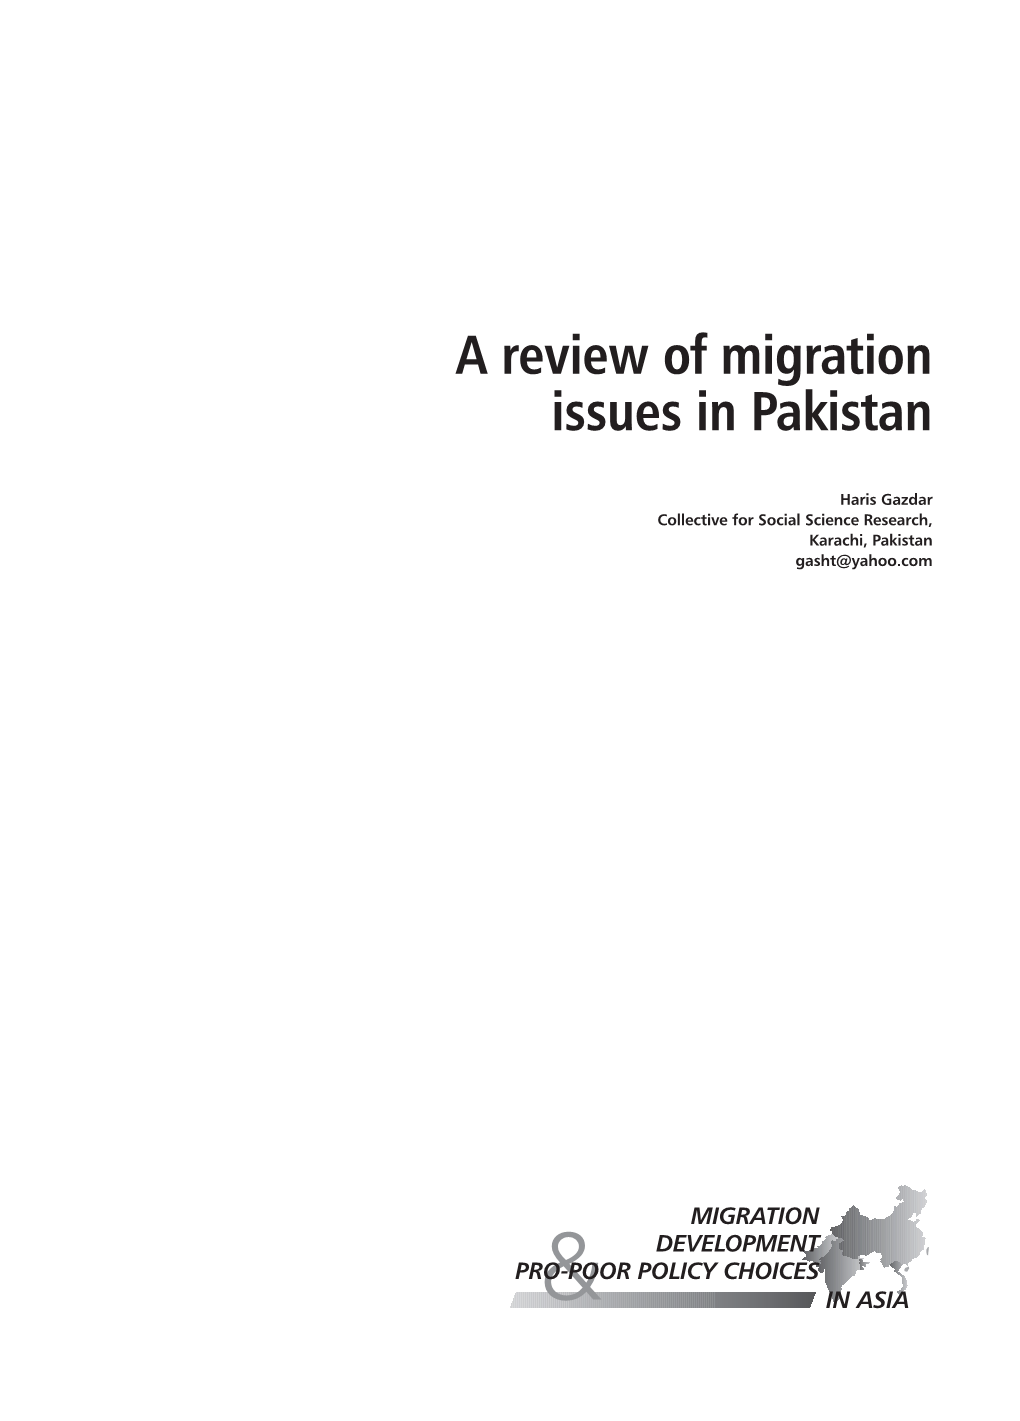 A Review of Migration Issues in Pakistan